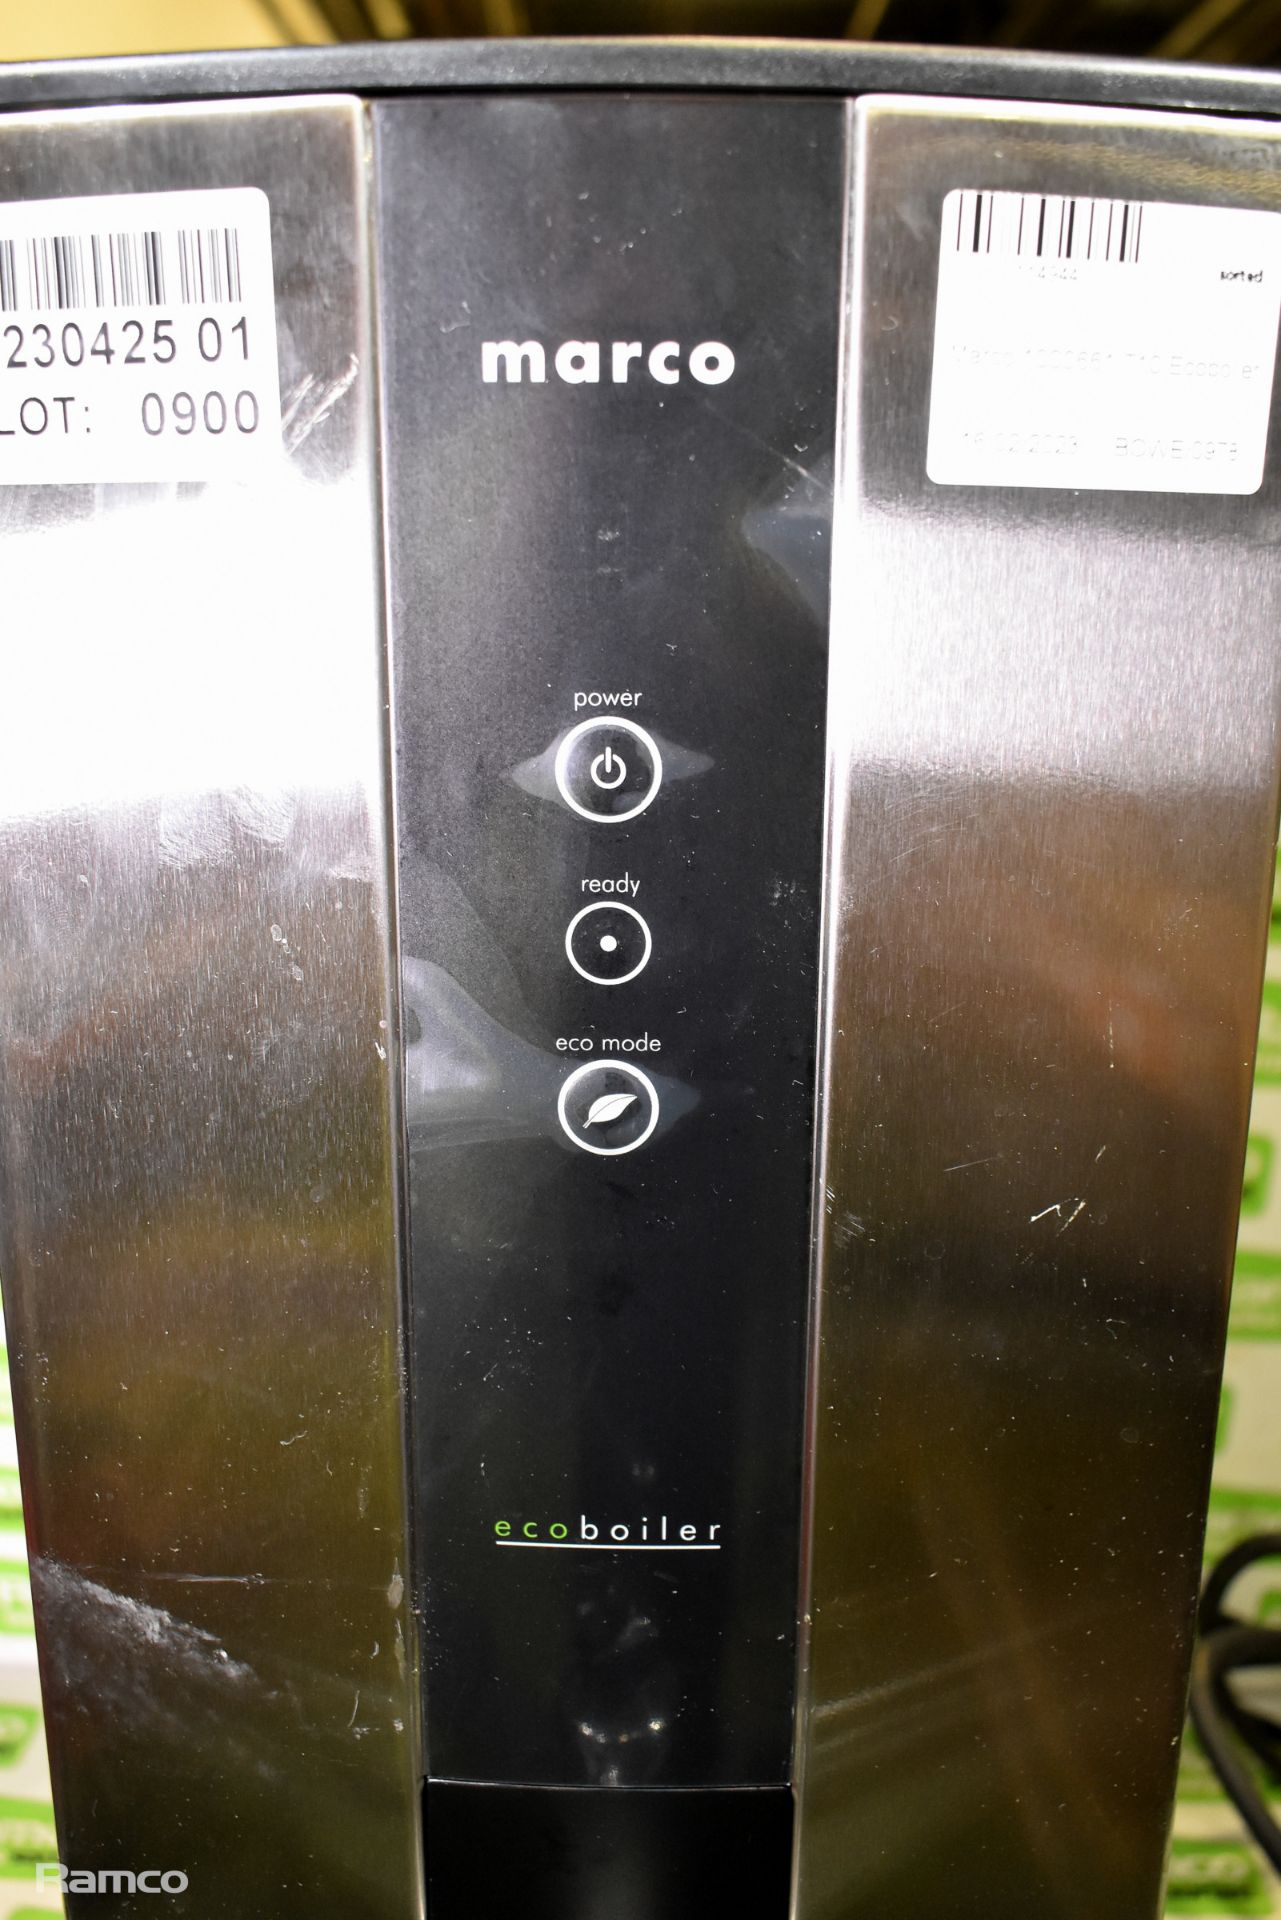 Marco 1000661 T10 Ecoboiler - Image 2 of 5